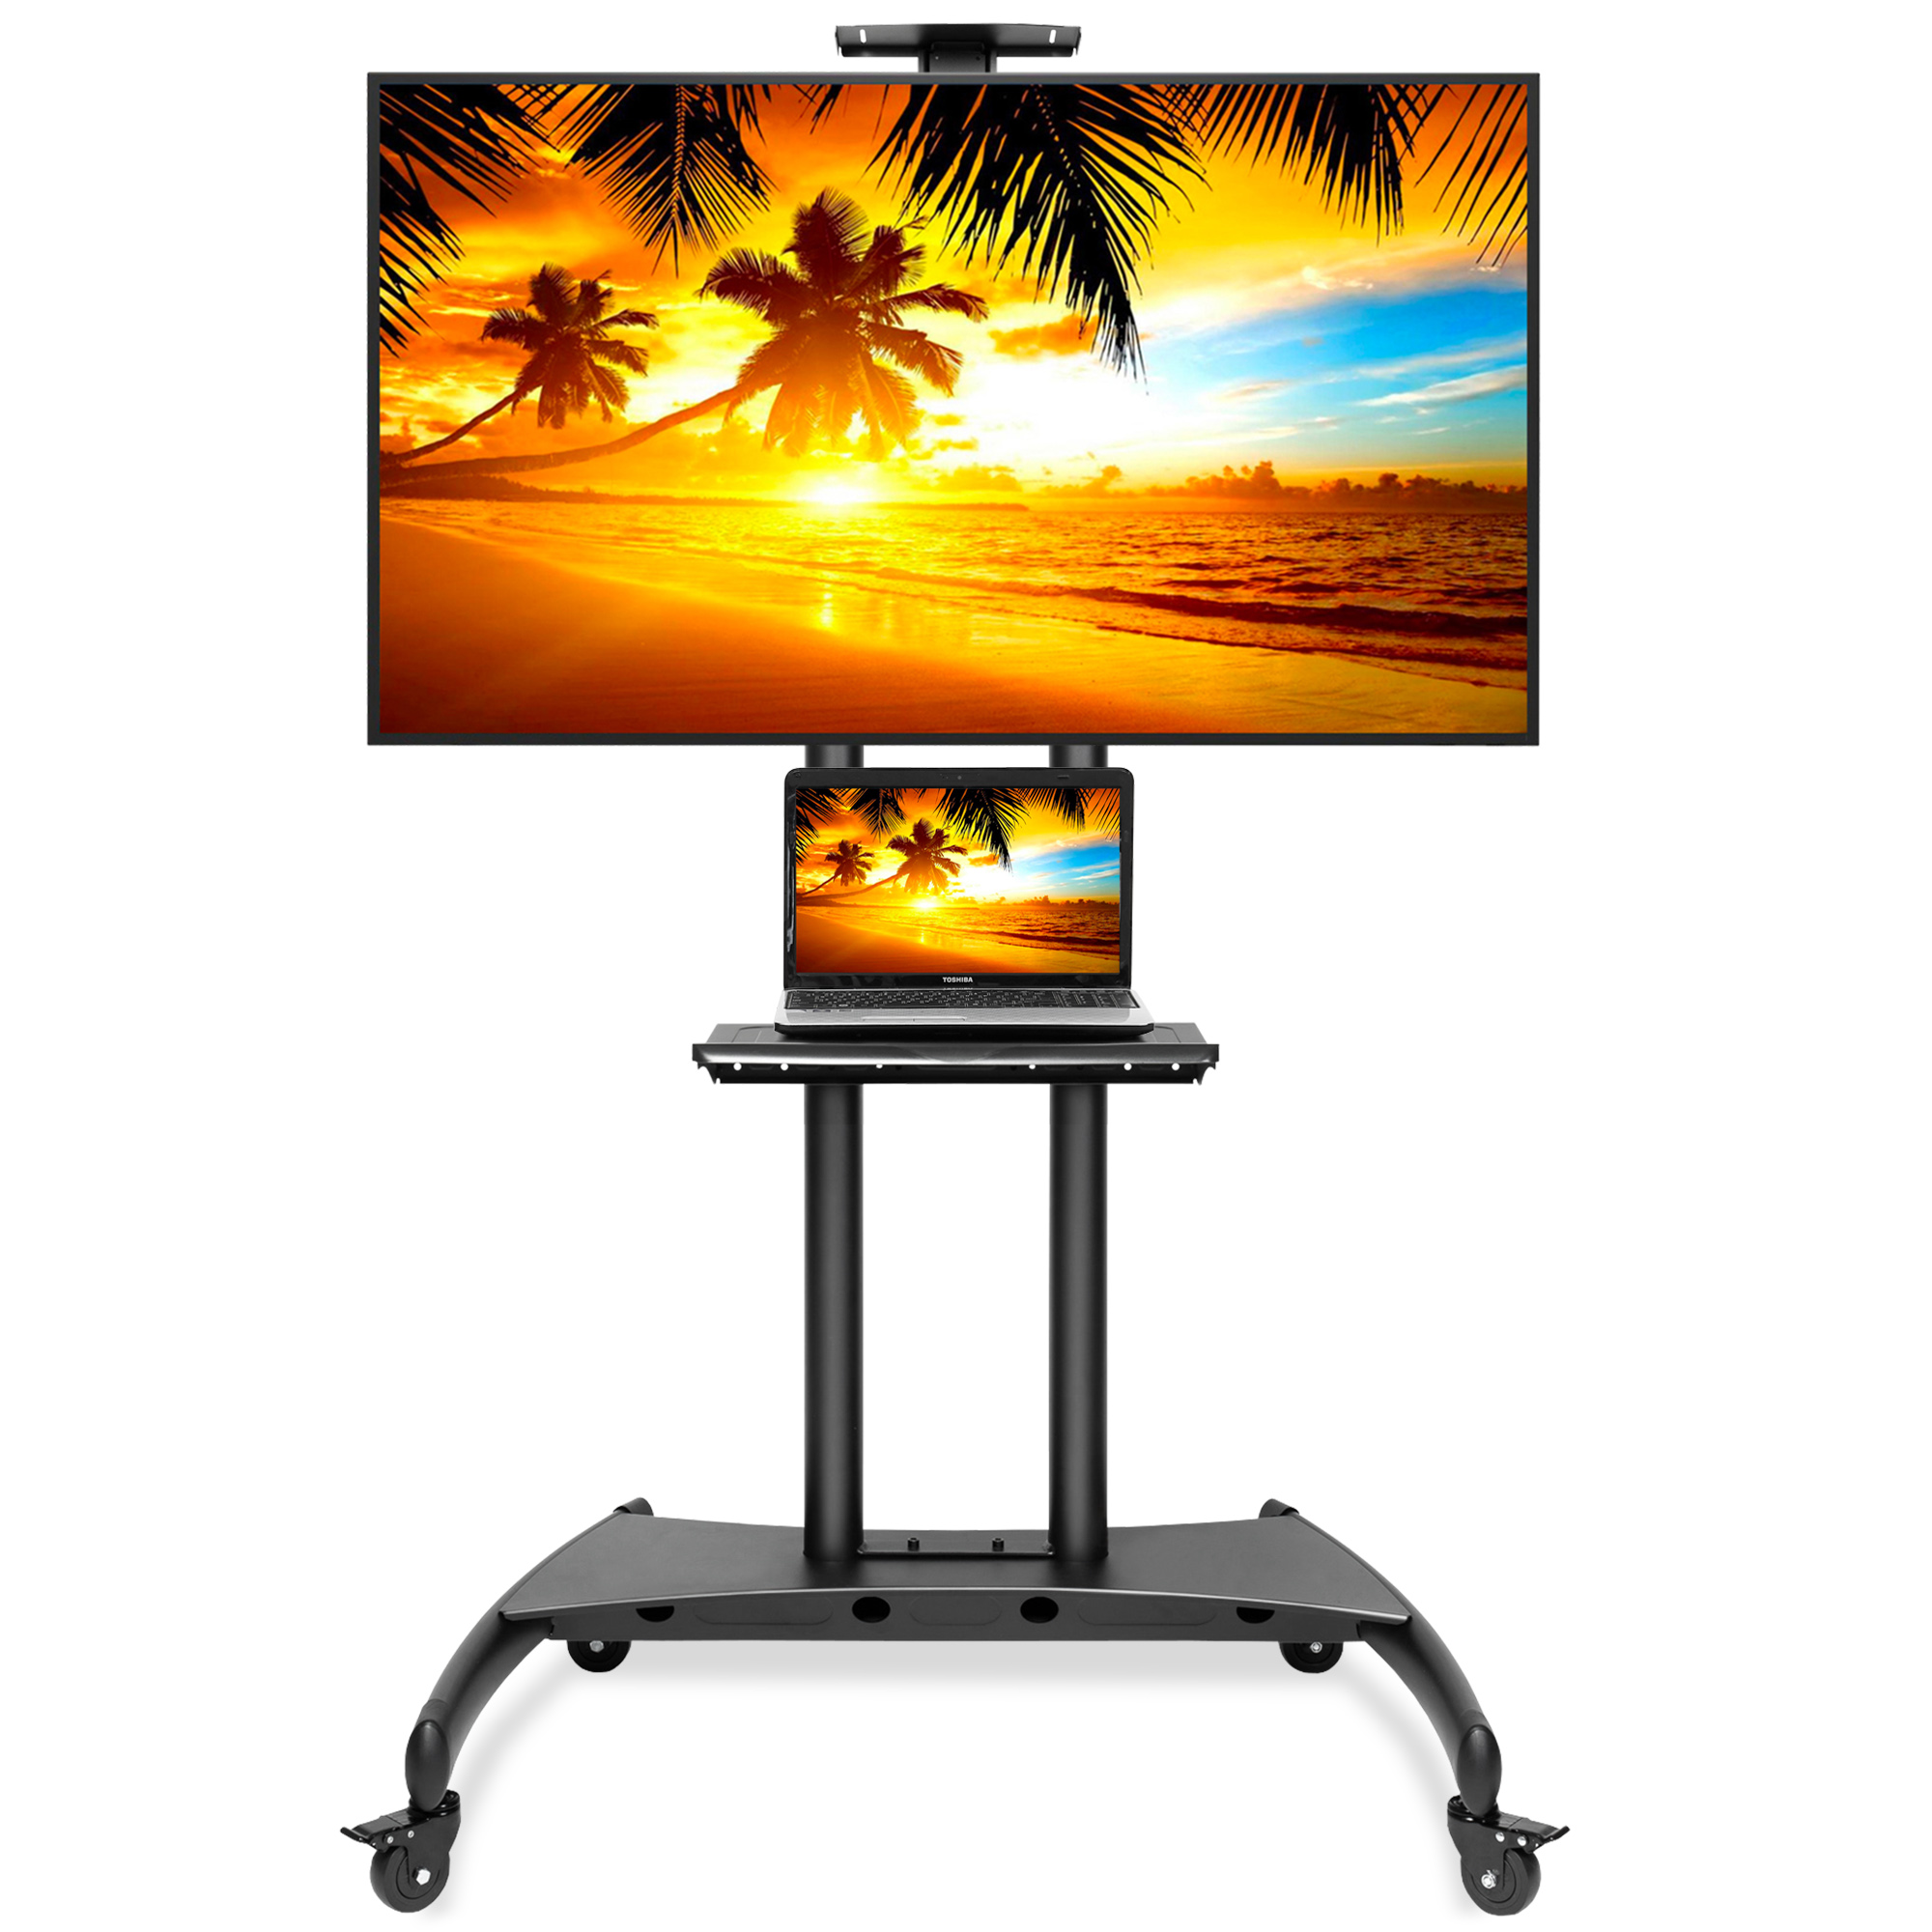 Mount Factory TV Stand Mobile Cart Mount Wheels for Flat Screen, LED, Plasma - fits 55" - 80"